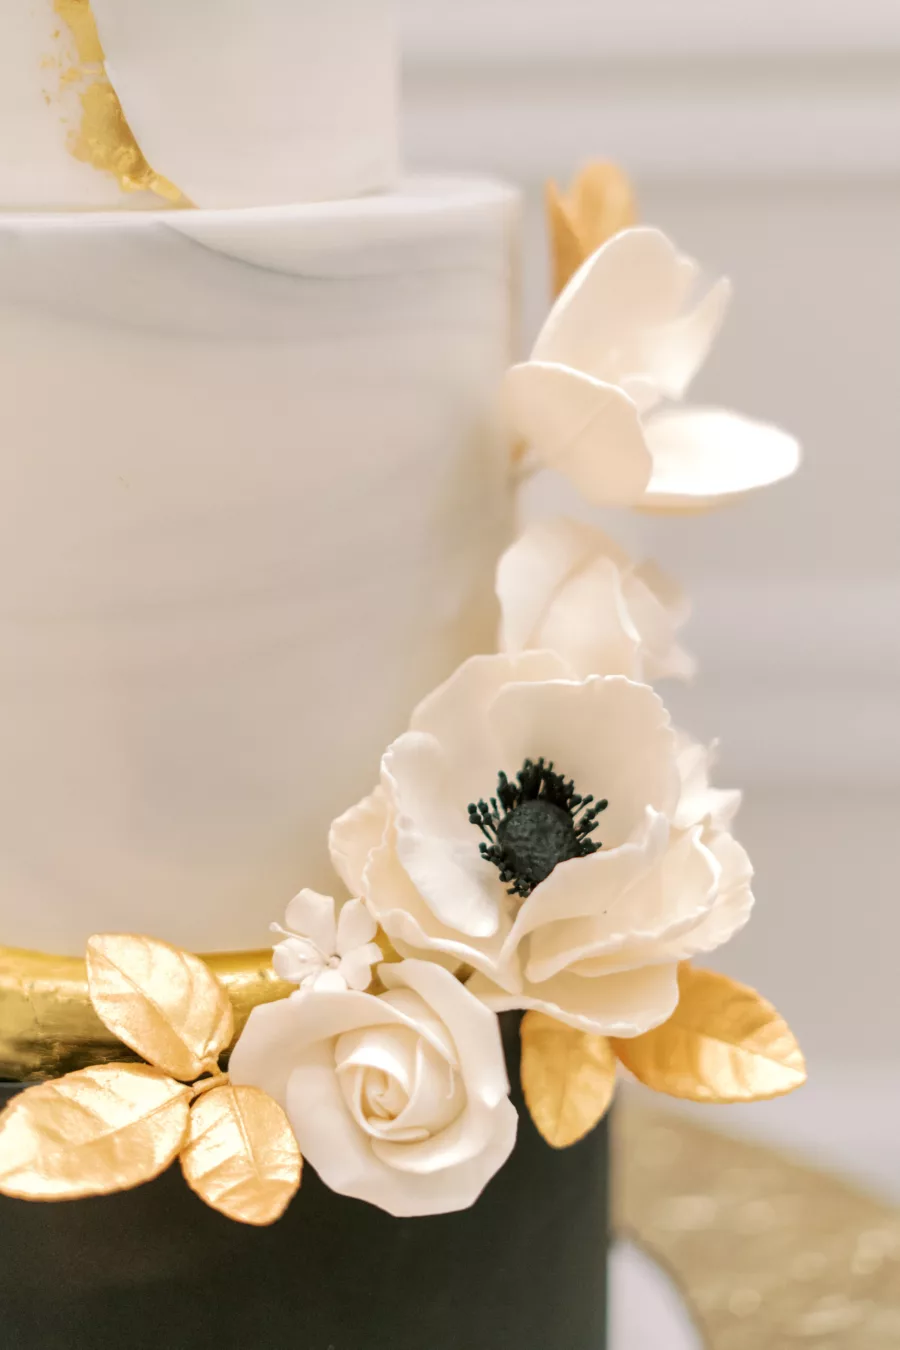 White Anemone Gumpaste Flowers and Gold Leaves for Wedding Cake | Tampa Bay Cake Company